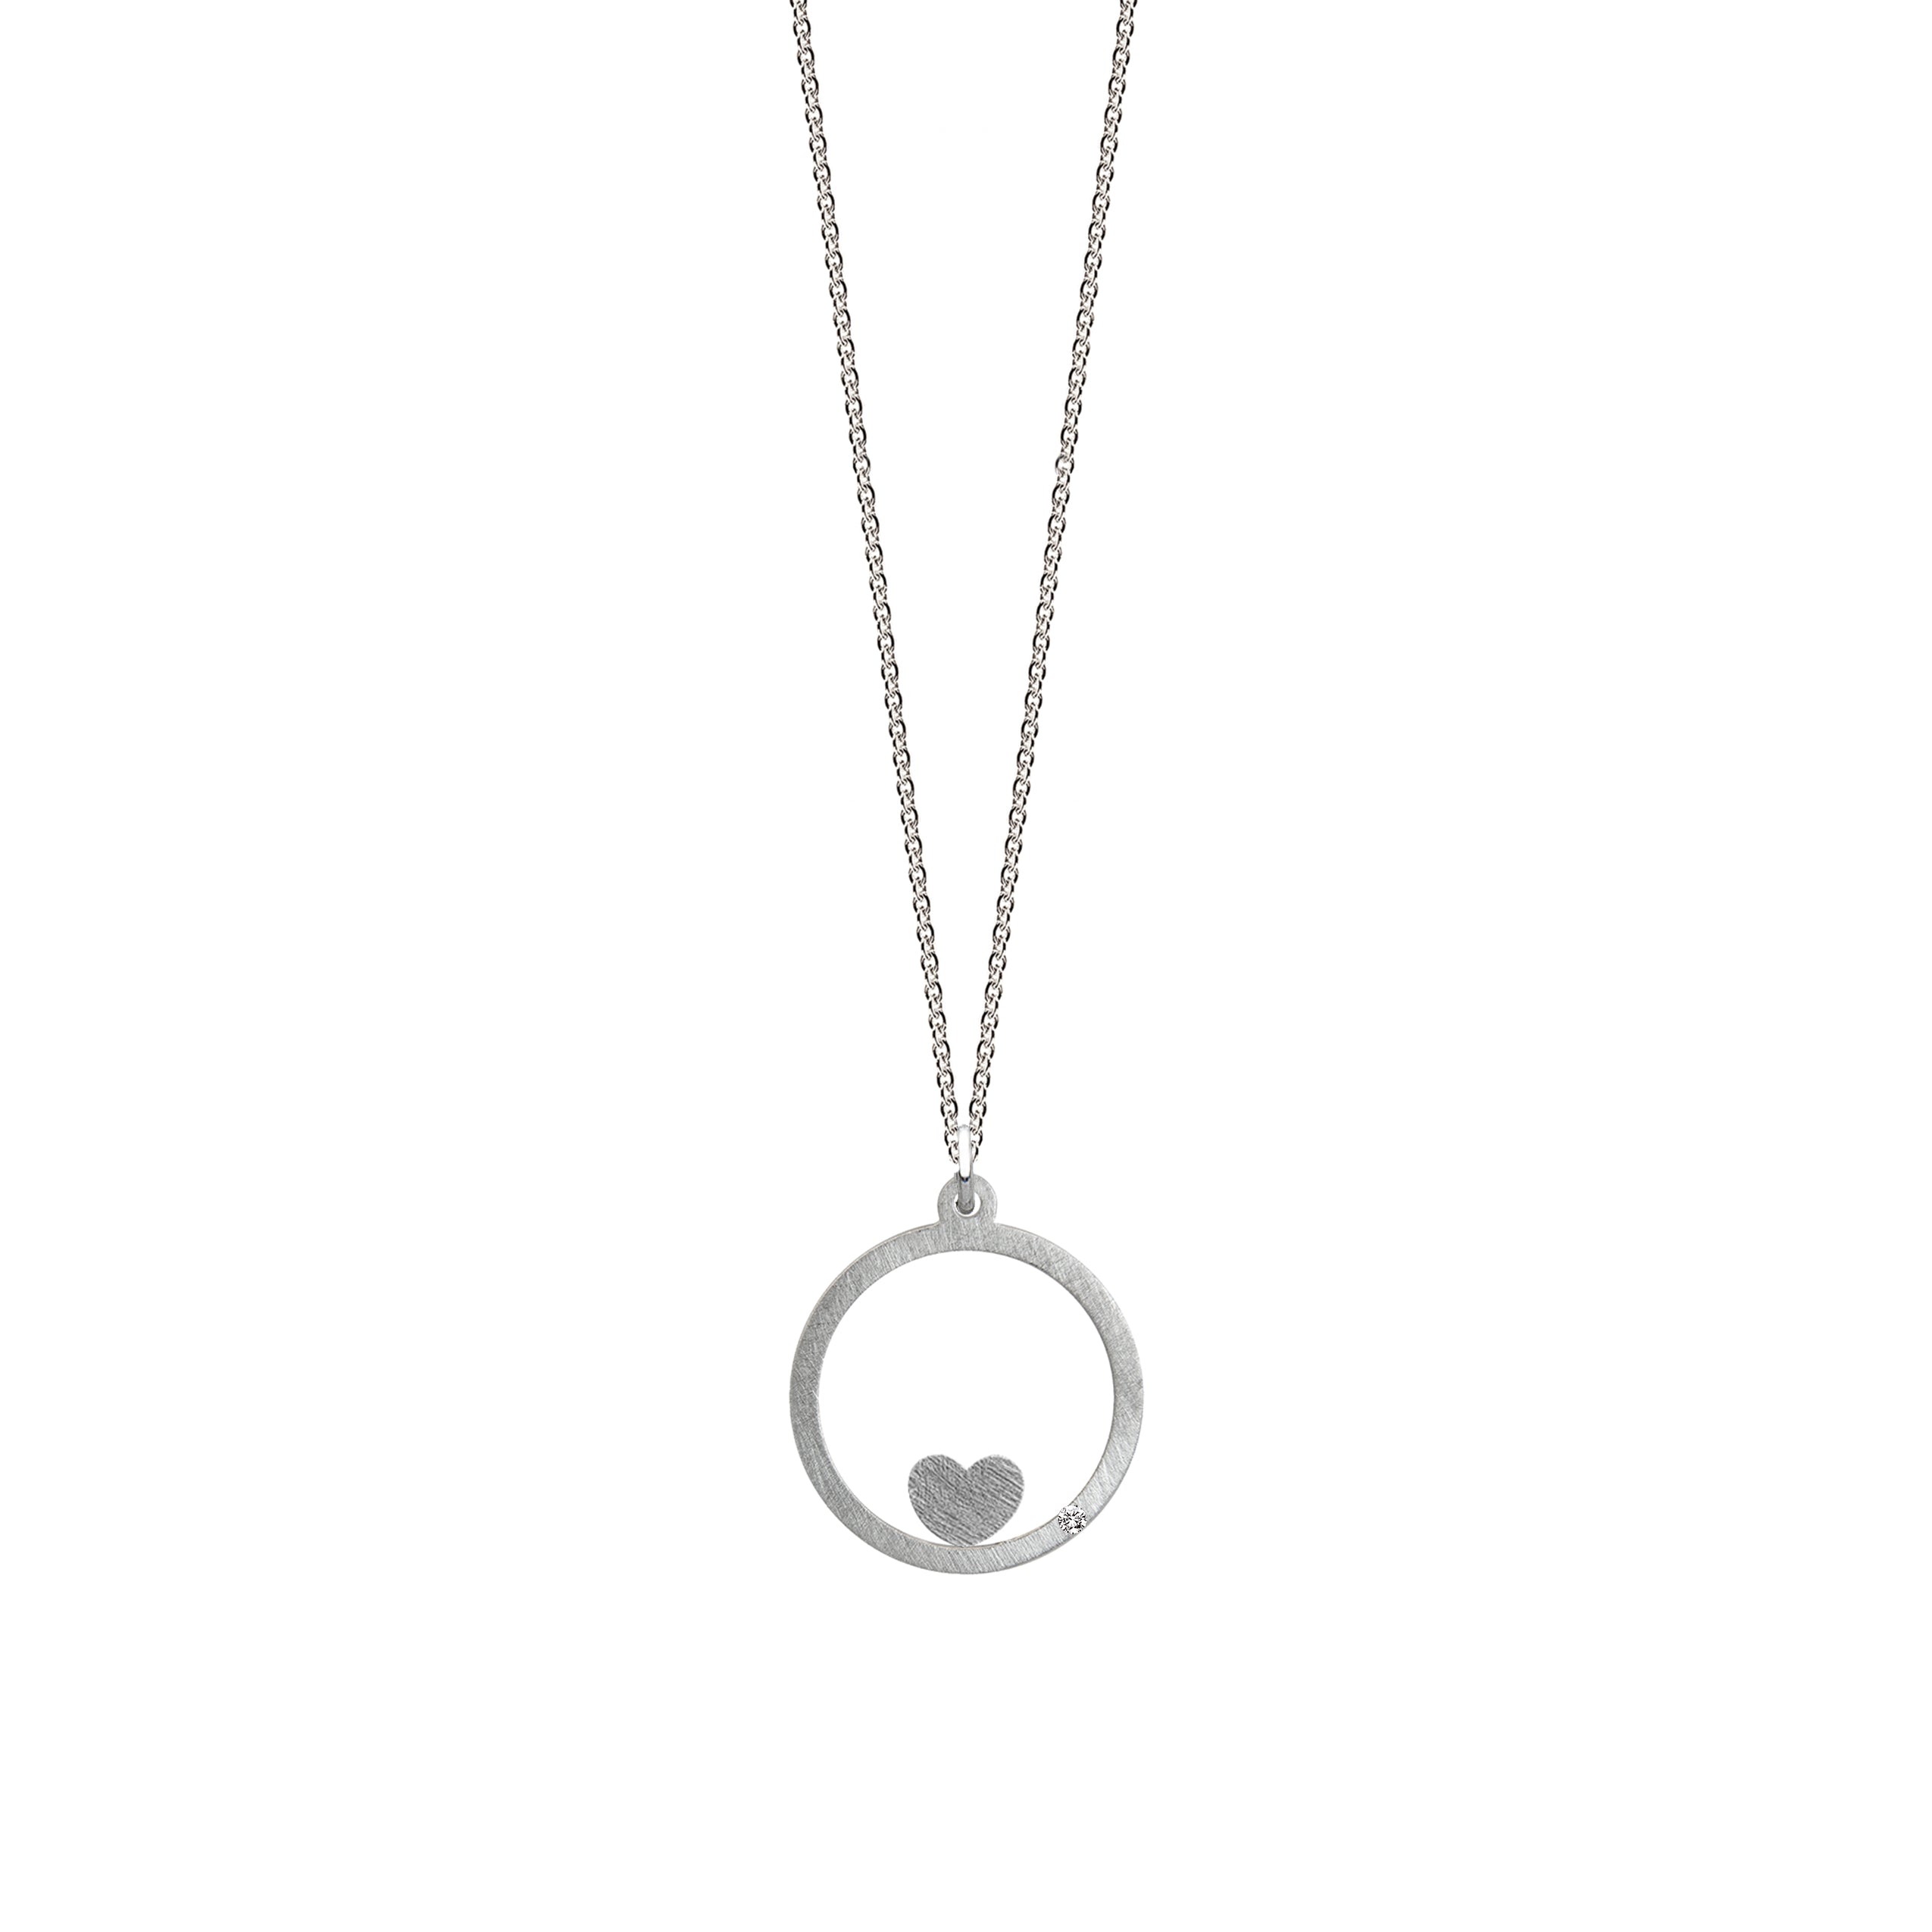 Intention pendant "LOVE" with brilliant 0.007ct TWVS